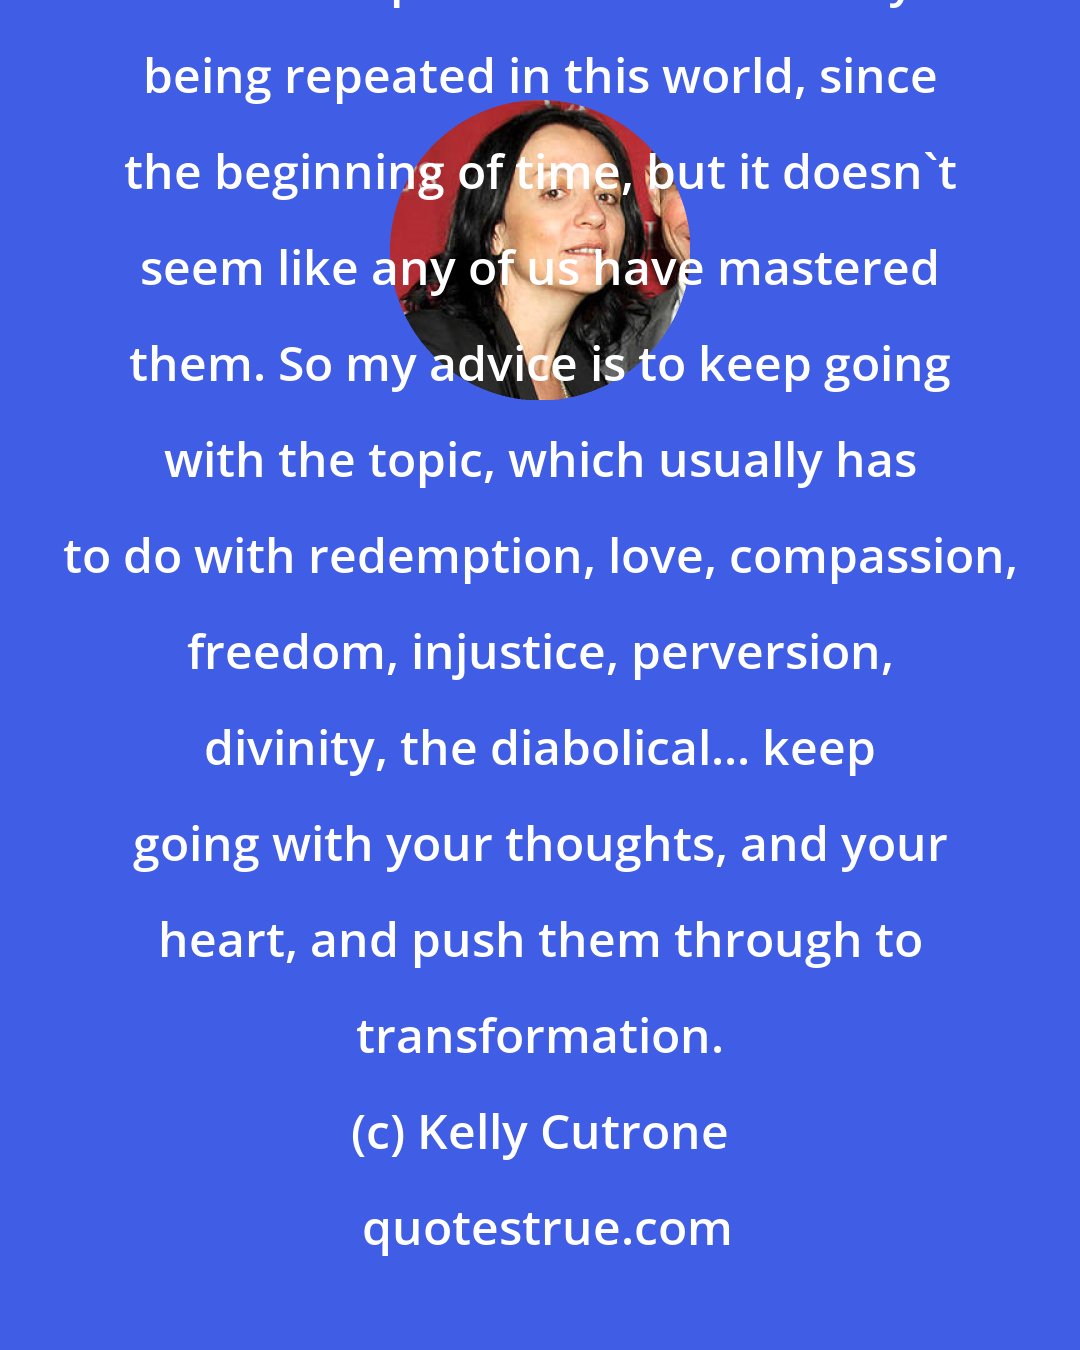 Kelly Cutrone: Everybody gets plagued by indifference and monotony. The truth is, there are concepts that are constantly being repeated in this world, since the beginning of time, but it doesn't seem like any of us have mastered them. So my advice is to keep going with the topic, which usually has to do with redemption, love, compassion, freedom, injustice, perversion, divinity, the diabolical... keep going with your thoughts, and your heart, and push them through to transformation.